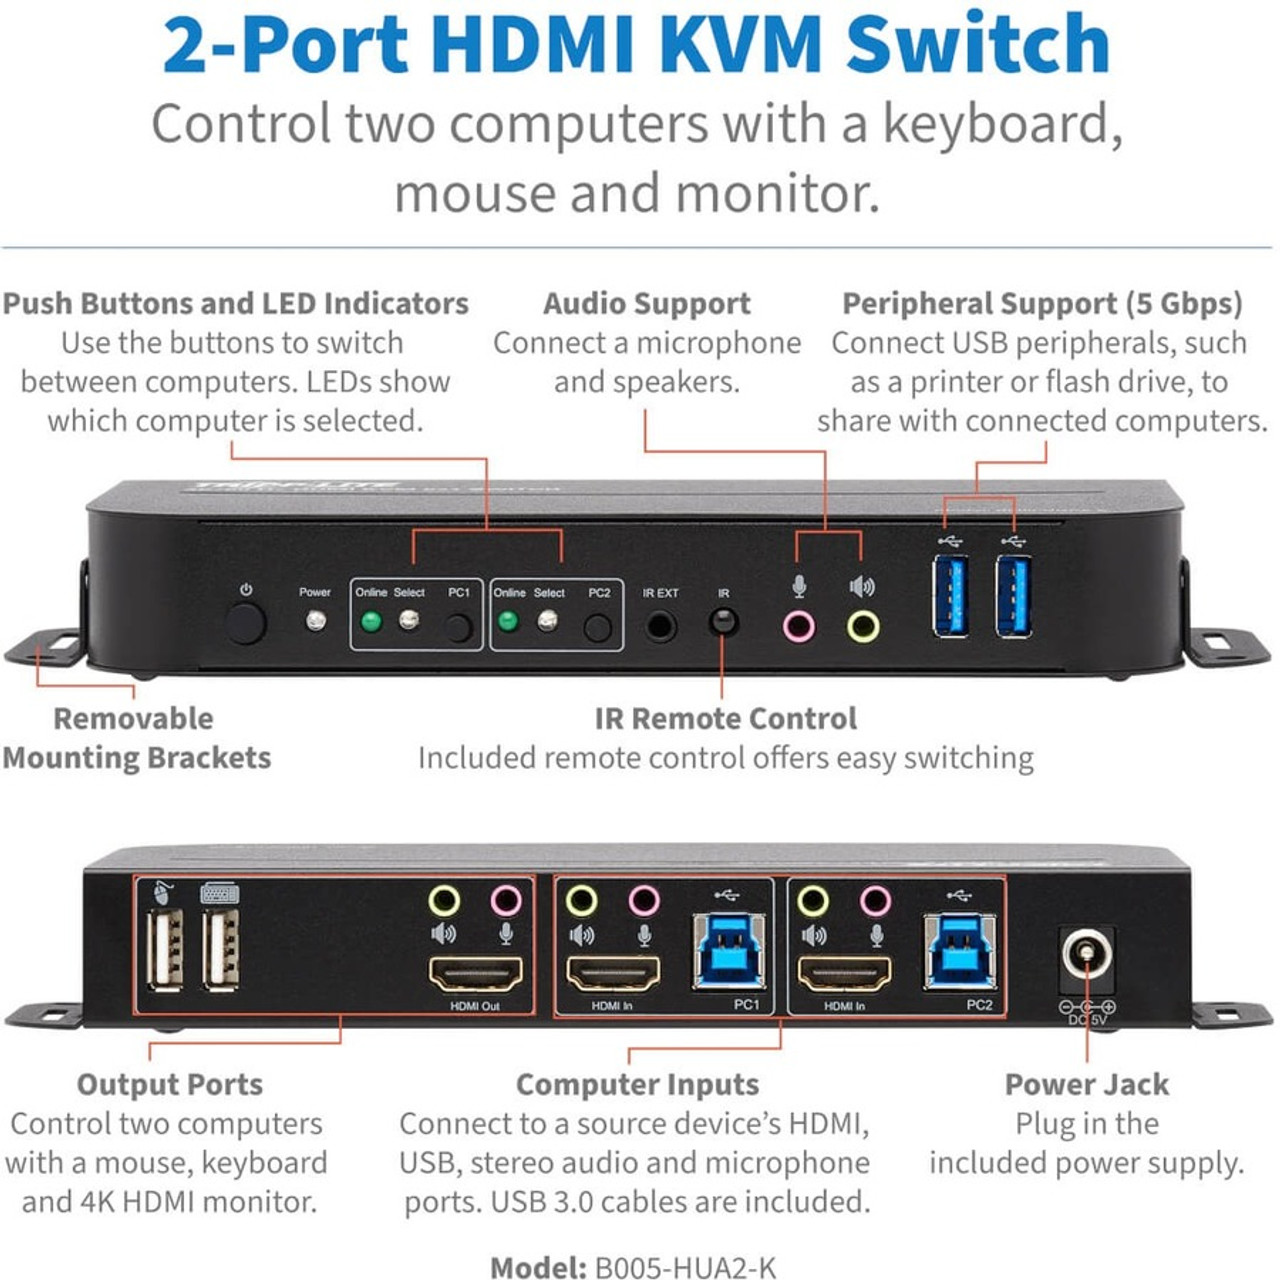 How to Control Two Systems with KVM Switch 